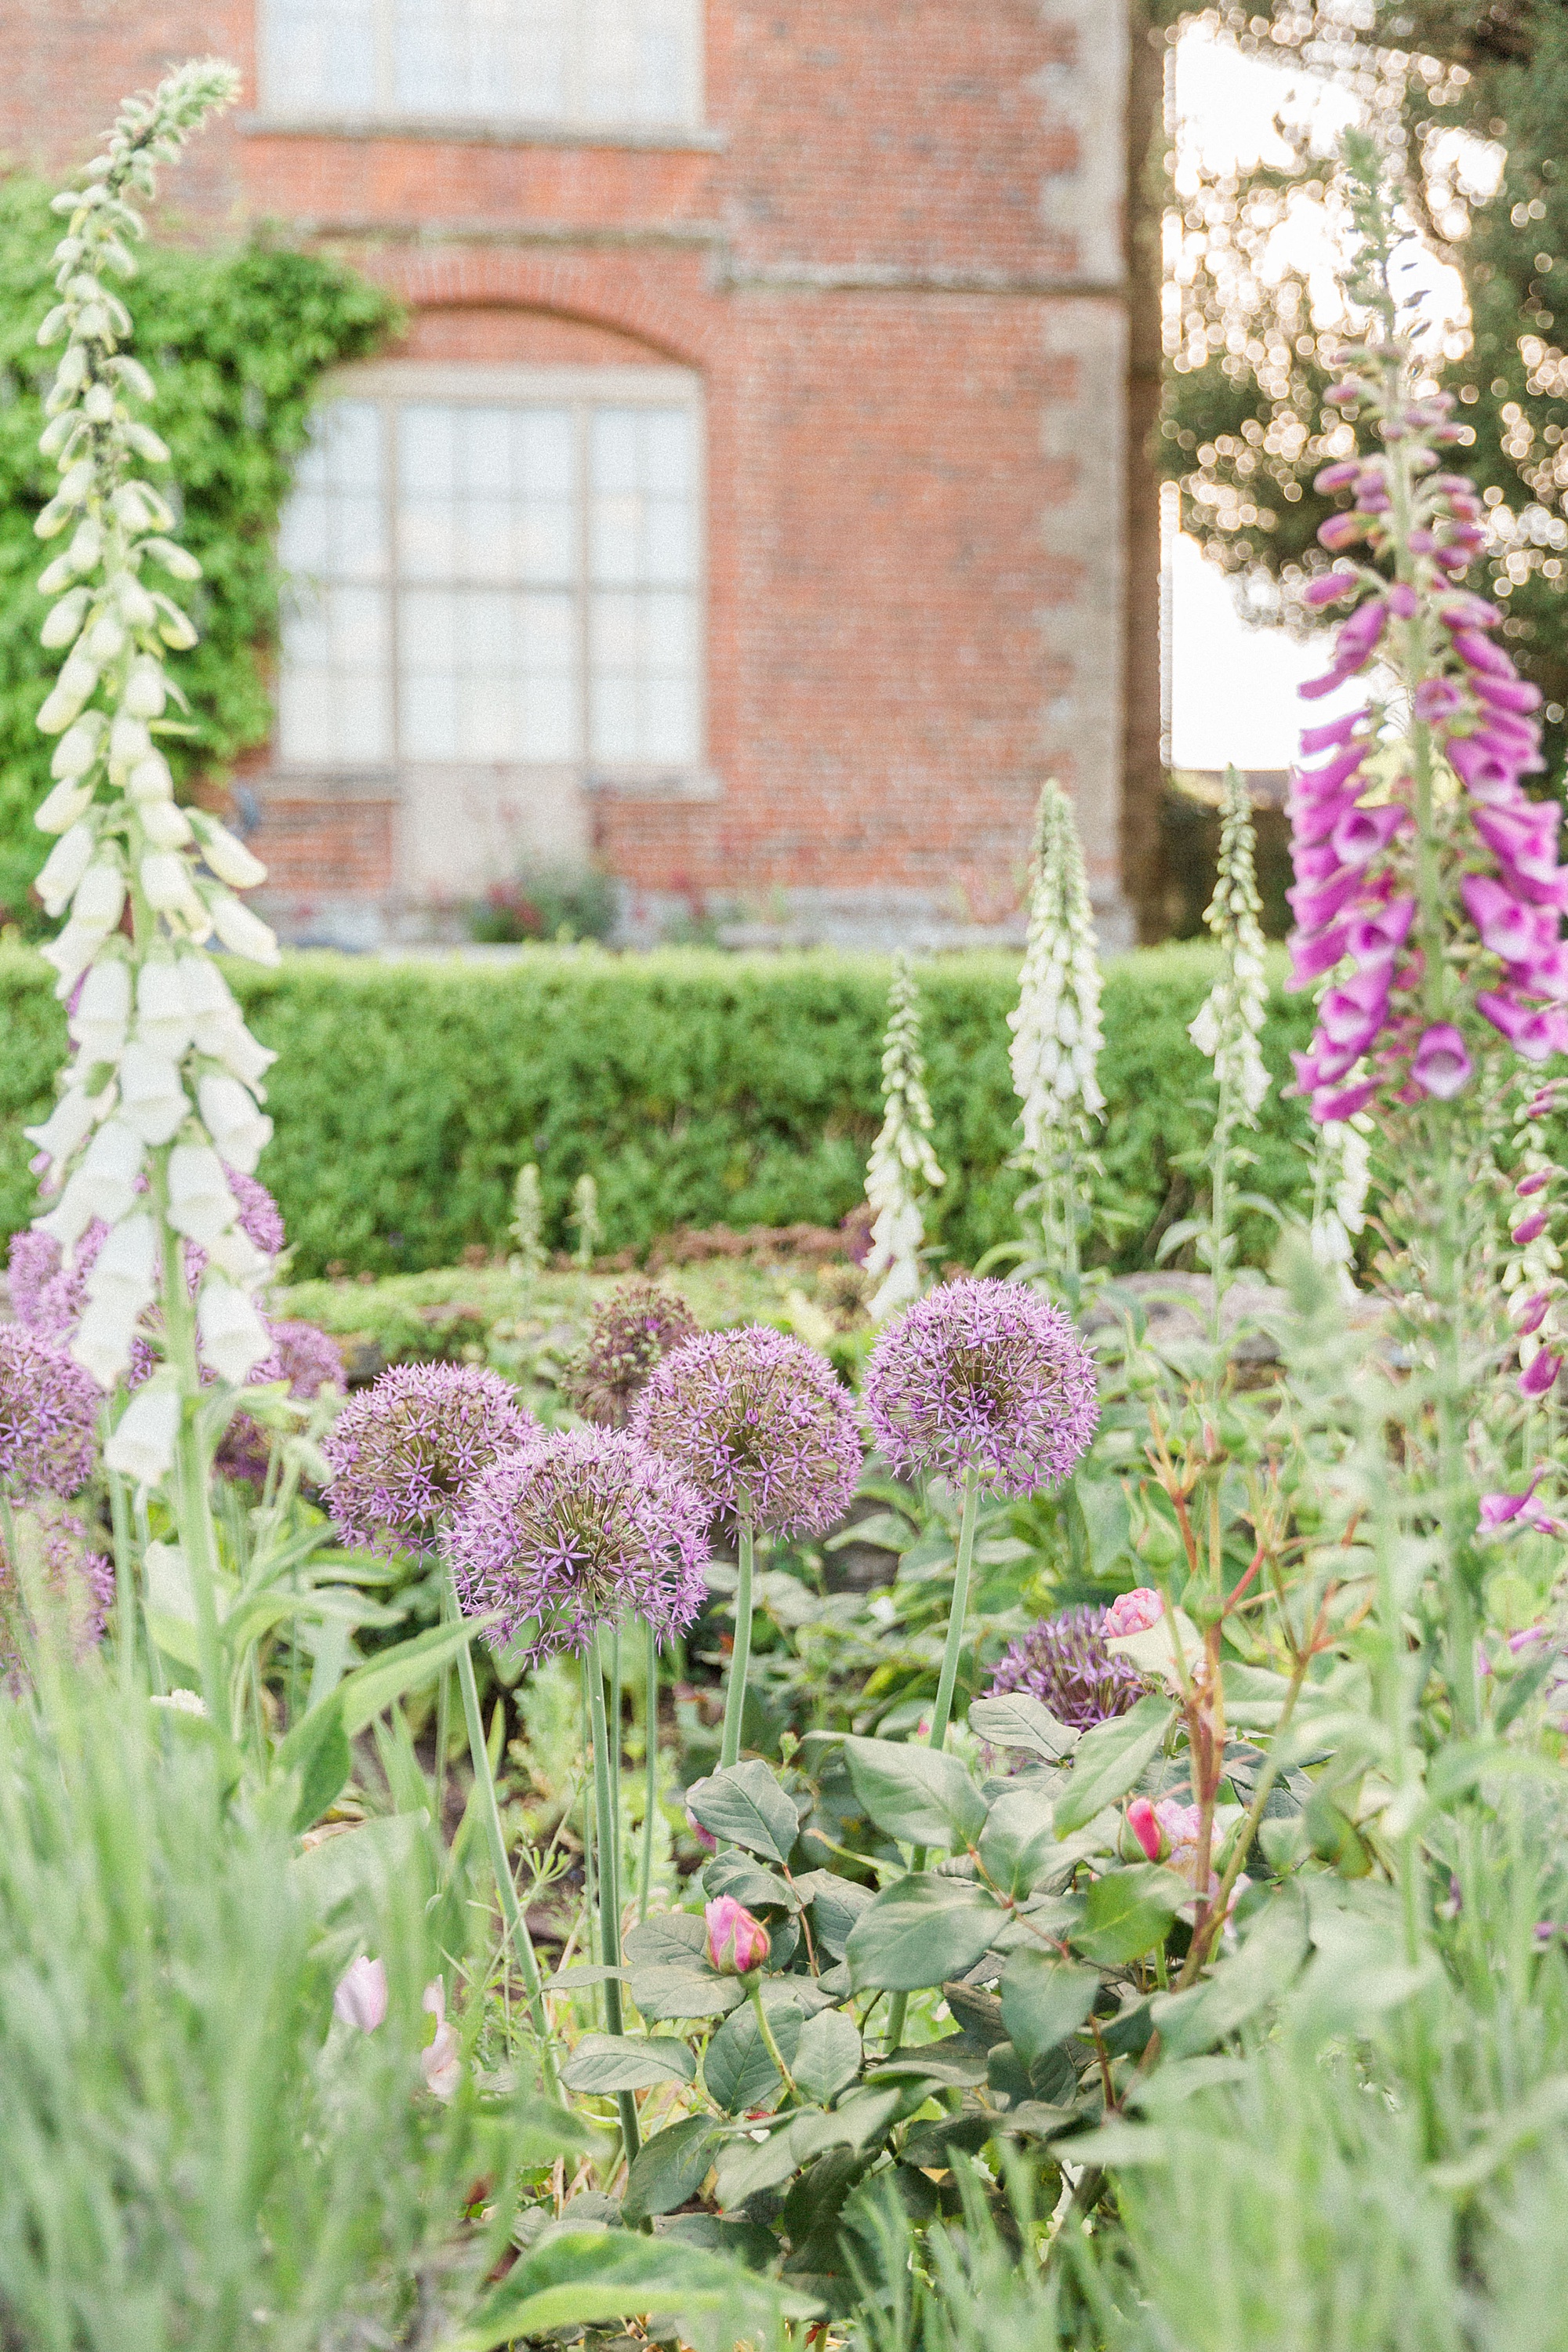 photos of alliums and other flowers in a border at Hellen's Manor in herefordshire with the manor house behind the floral border